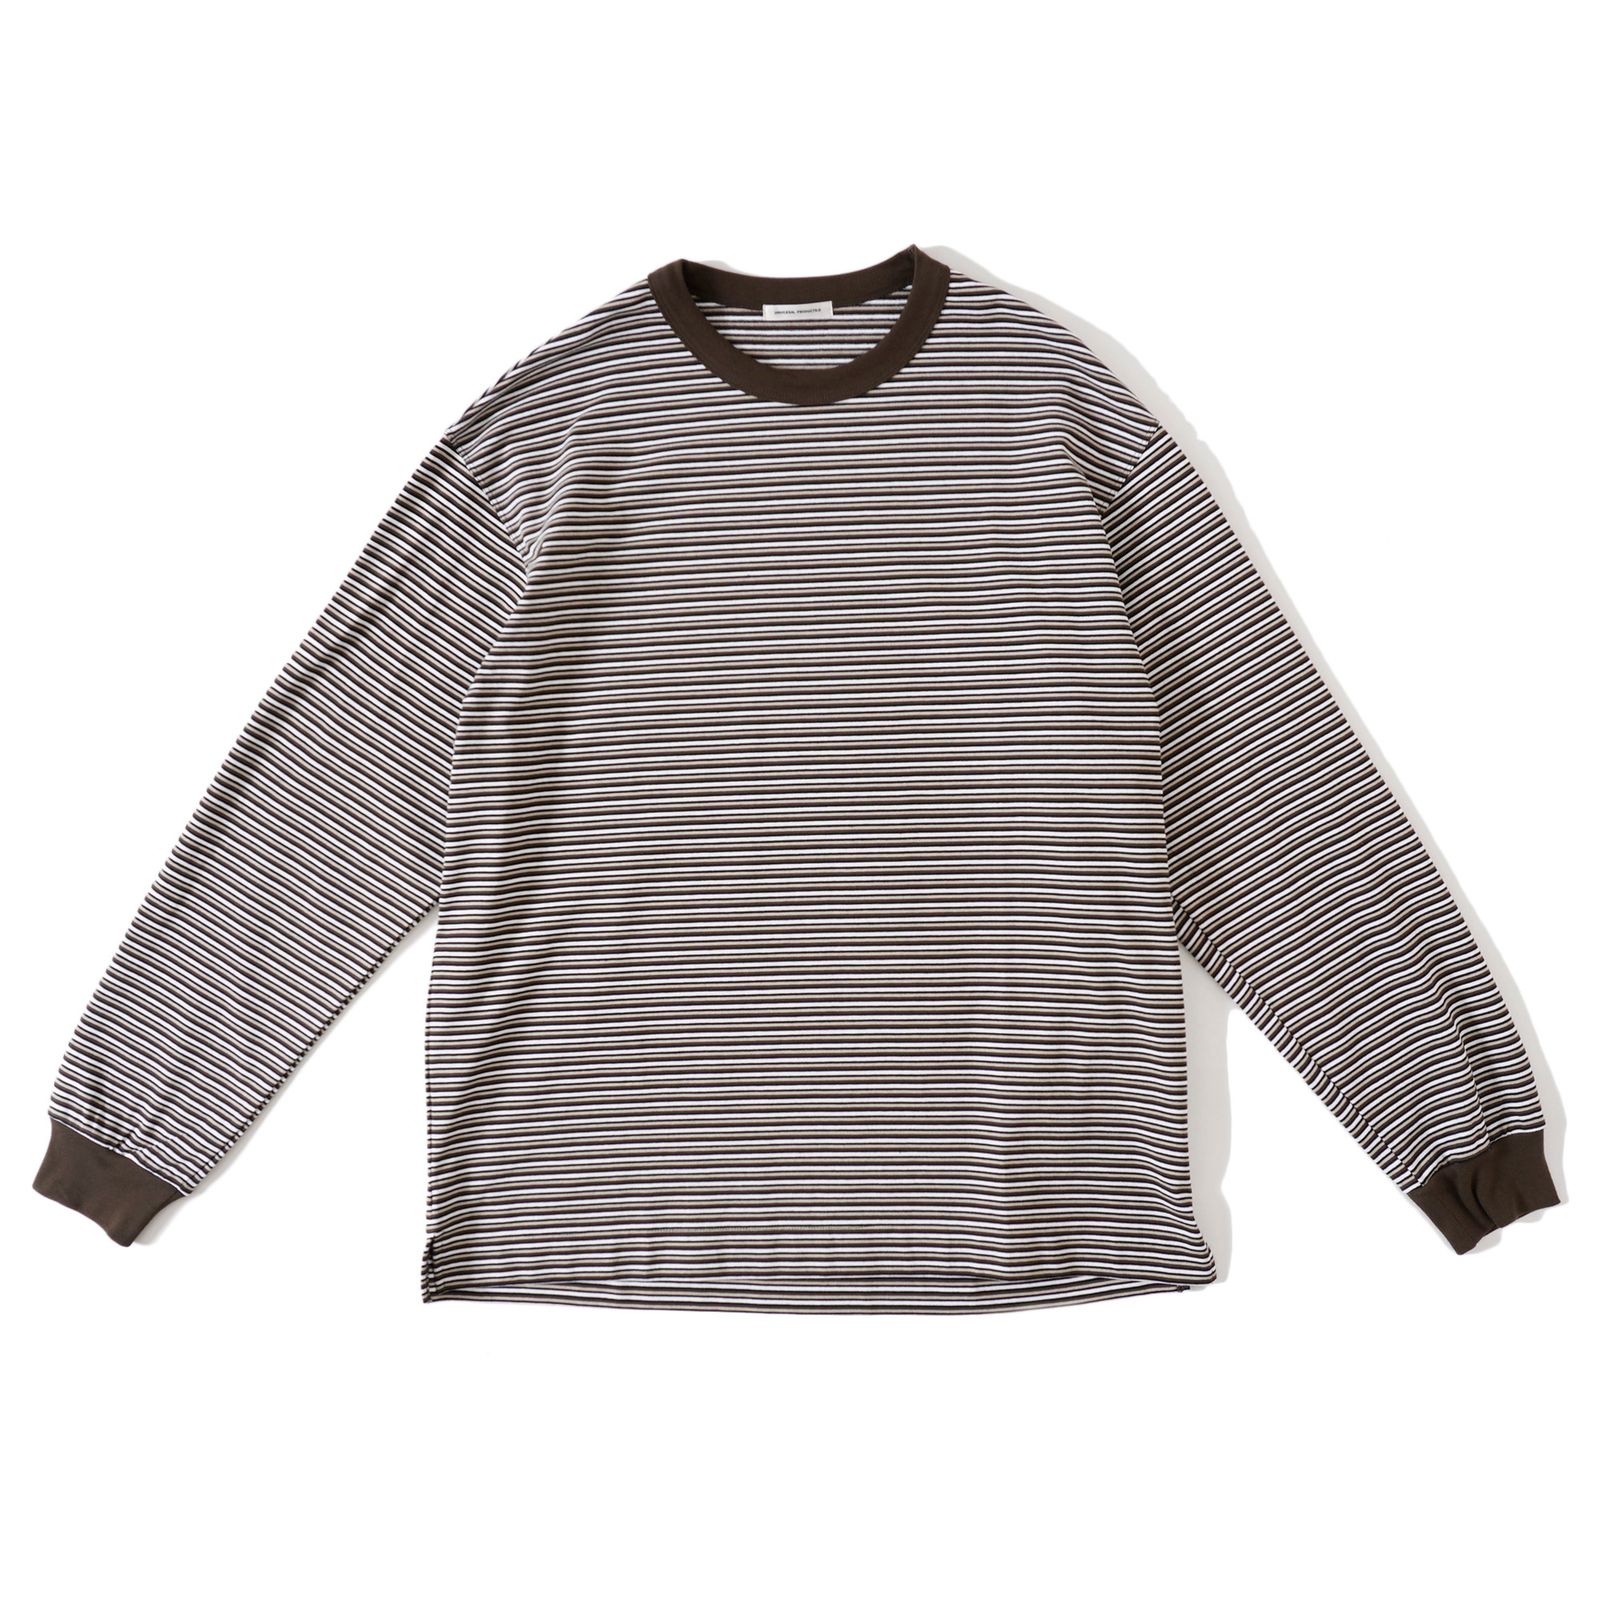 UNIVERSAL PRODUCTS - MULTI BORDER L/S T-SHIRT BROWN